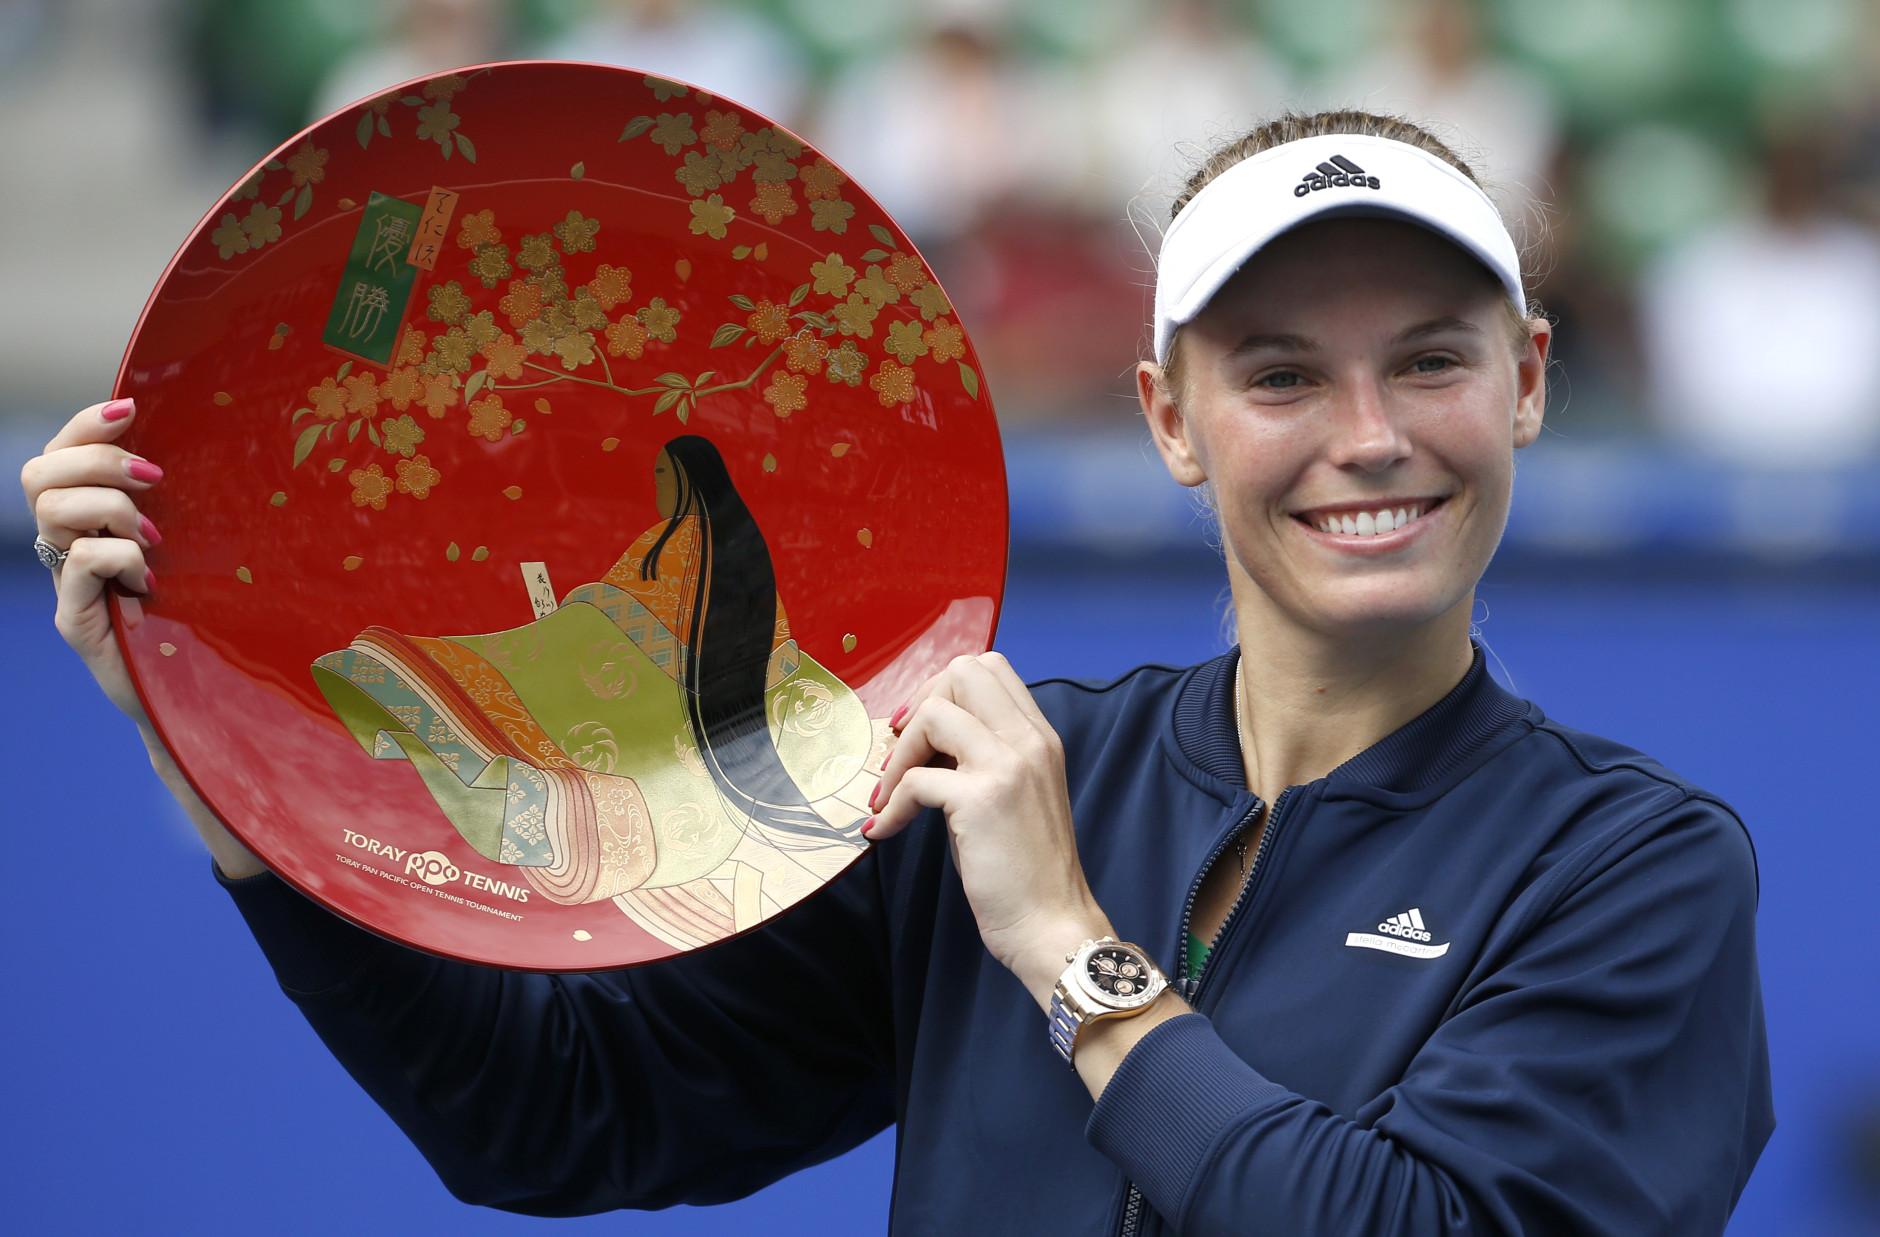 Caroline Wozniacki Wins Pan Pacific Open for First Title of the Year